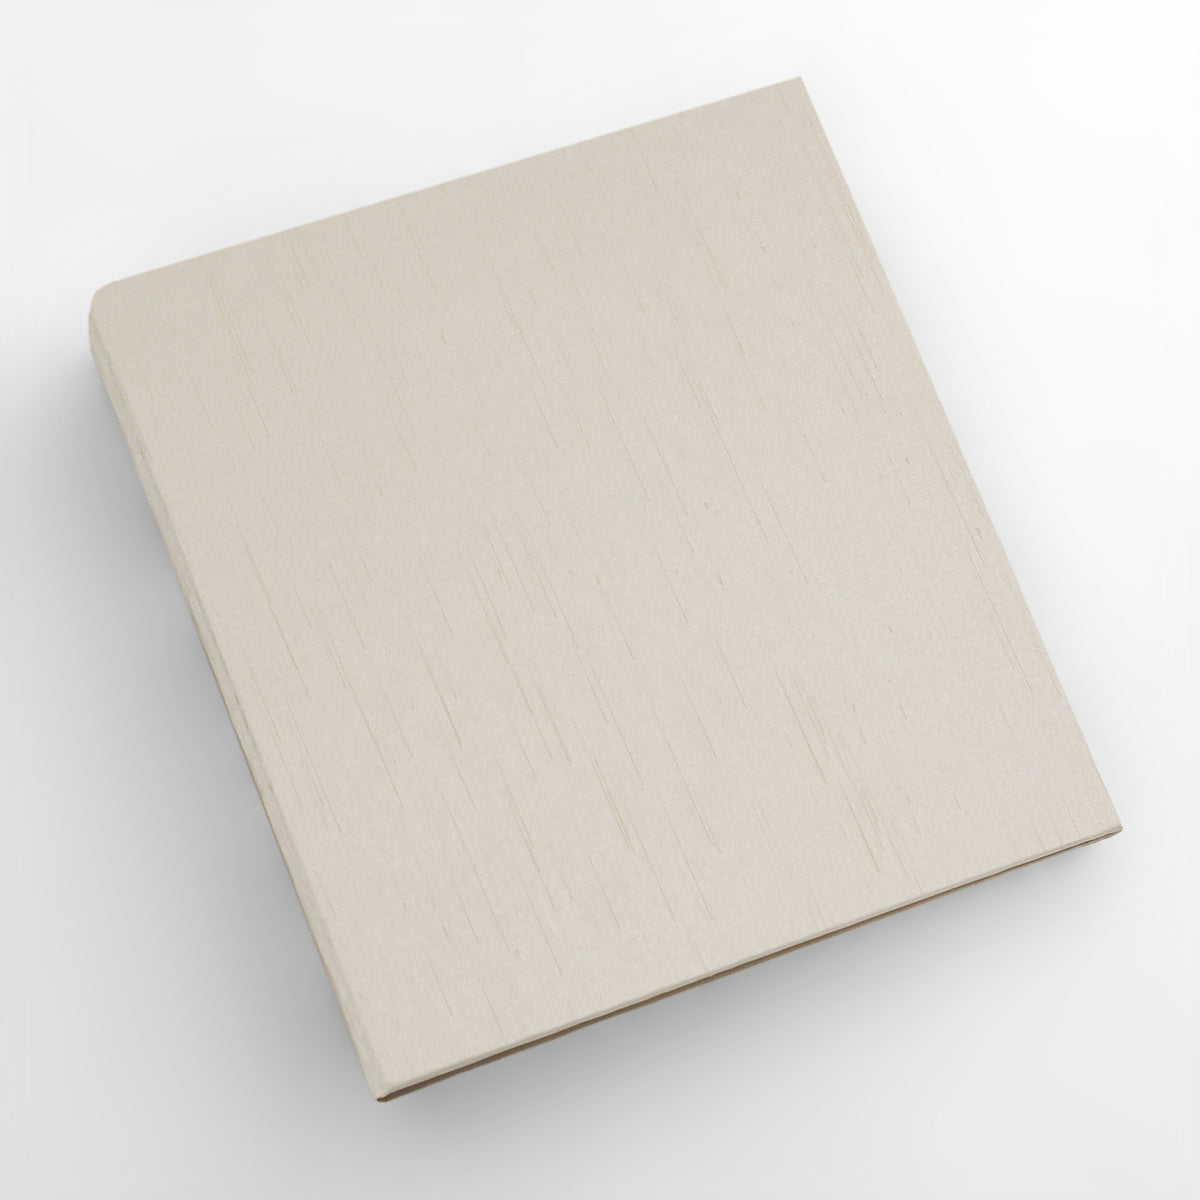 Large Photo Binder For 8x10 Photos | Cover: Champagne Silk | Available Personalized